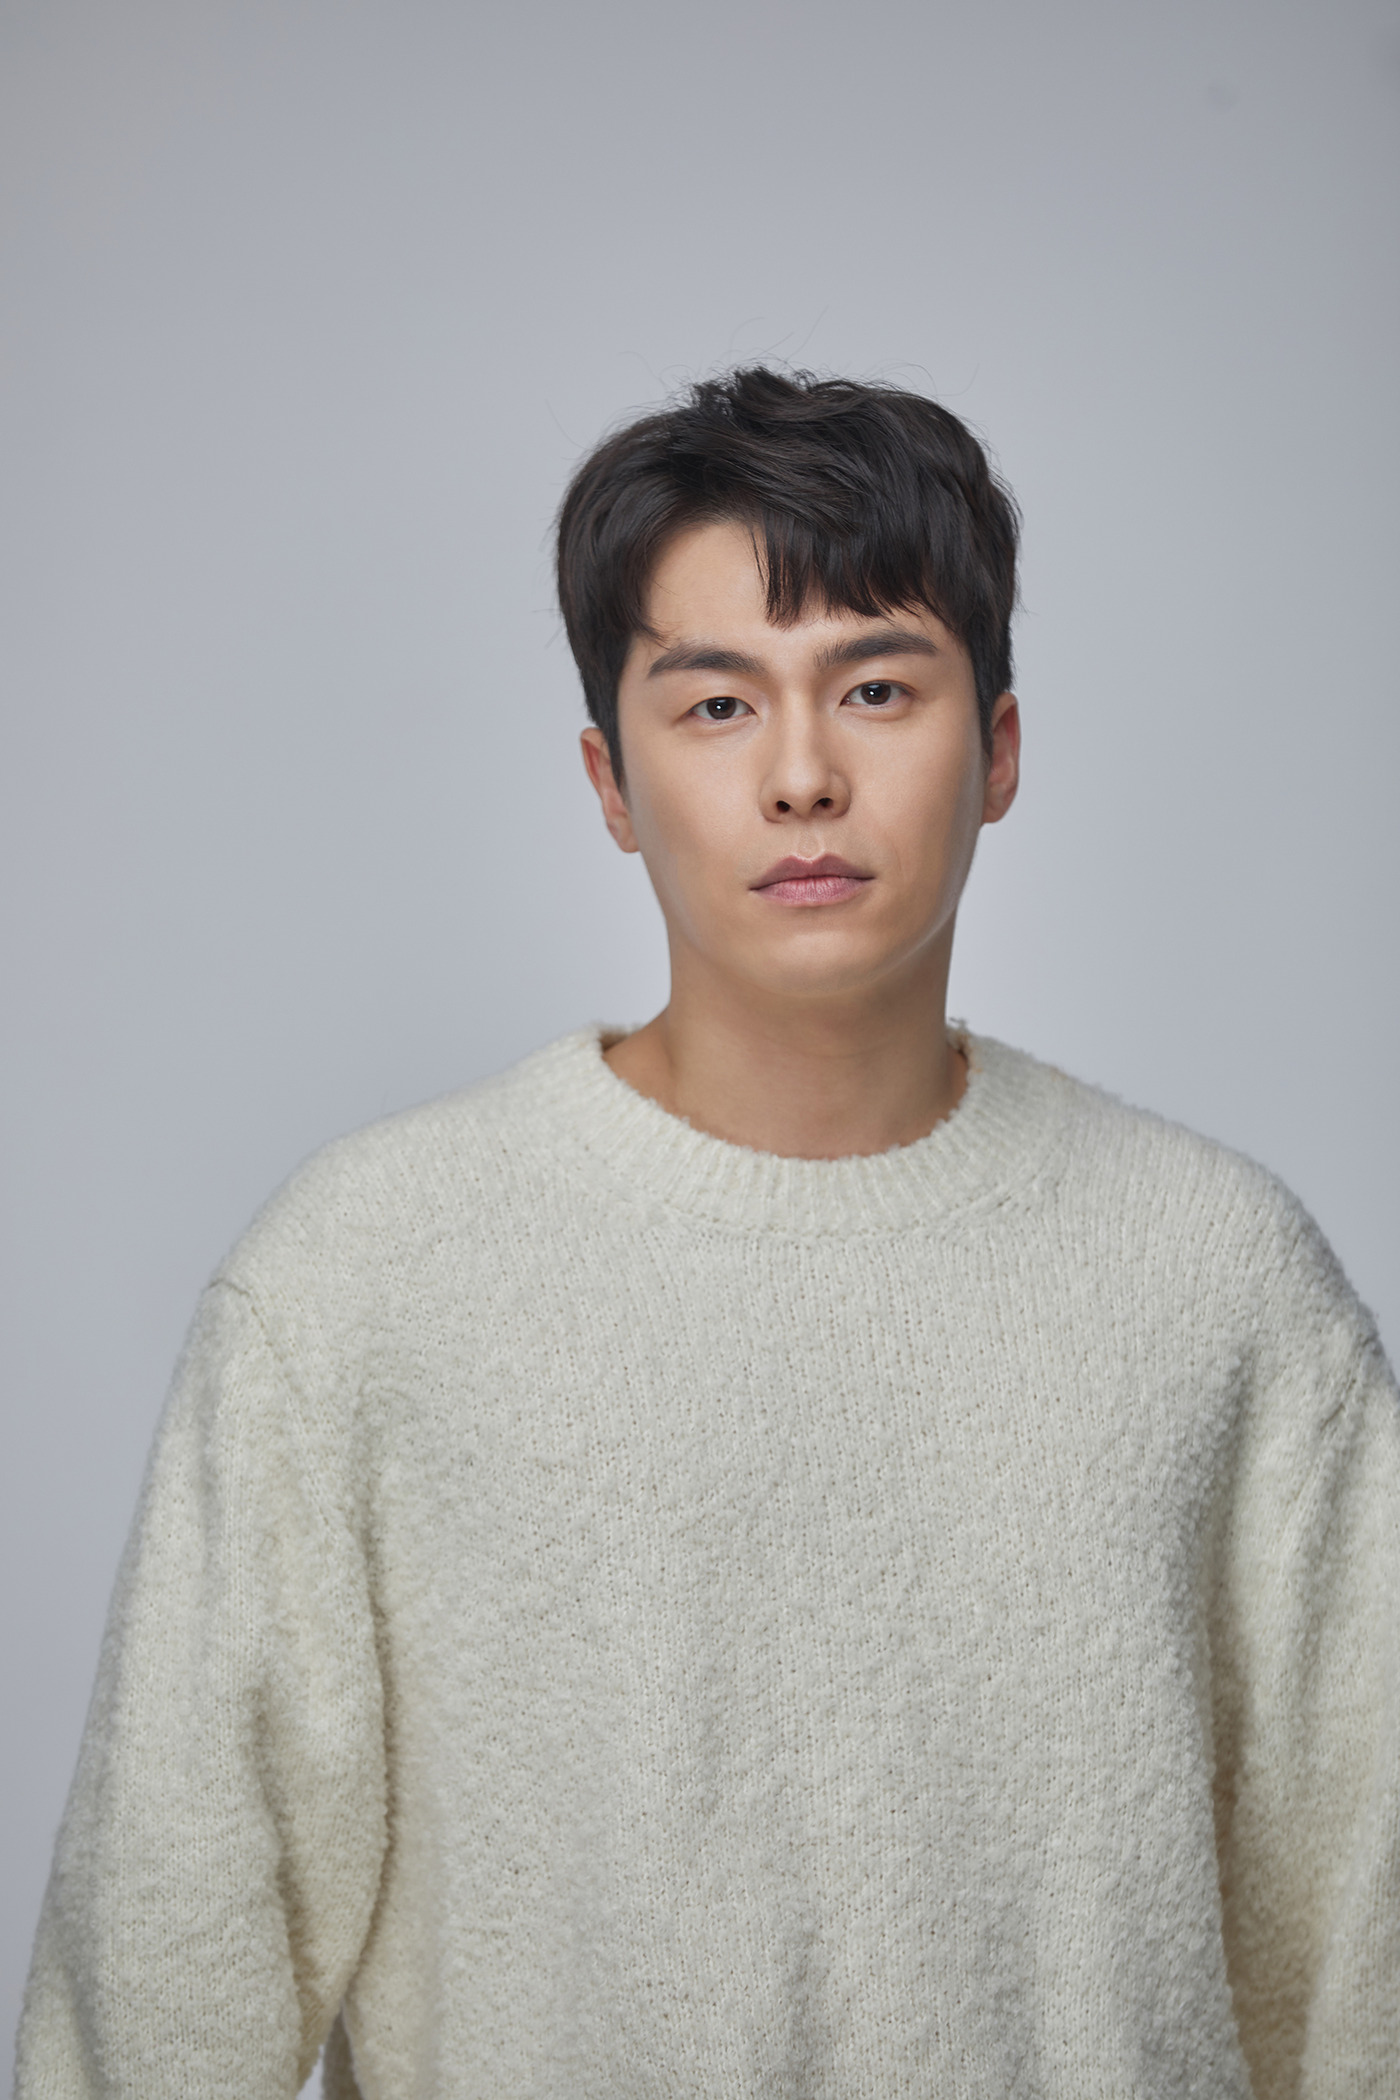 Seoul = = Actor Lee Jae-won has confirmed his appearance on Record of Youth.Lee Jae-won has confirmed her appearance on TVNs new monthly drama Record of Youth (playplayplay by Ha Myung-hee/director Ahn Gil-ho), said CJS Entertainment, a subsidiary company, on the 29th.Record of Youth draws the growth Record of Youth who try to achieve dreams and love without despairing on the wall of reality.Ahn Gil-ho PD, who showed the power of detailed and delicate directing through Secret Forest and Memories of Alhambra Palace, and Ha Myung-hee, who melts realistic eyes to warm and emotional stories such as Doctors and Love Temperature,Lee Jae-won will show the chemistry between the disassembled brothers with his brother-in-law, Sa Hye-joon (Park Bo-gum), who is a model in the play and dreams of acting.Sa Kyung-joon is a son who has not missed the first place since he was a child. He feels a great sense of responsibility as his eldest son, but he is a poisonous personality for his younger brother.The brother of two people, Kimi, as well as the eldest son of the family of Sa, is expected to revitalize the drama.Lee Jae-won has made a realistic picture of a wonderful working daddy growing up through SBS drama VIP, and transformed into a passionate living lawyer in TVN Drama Stage 2020 - There is a tooth, giving laughter and impression to the room with a tight reality acting.Meanwhile, Record of Youth will be broadcasted at 9 pm on September 7th.